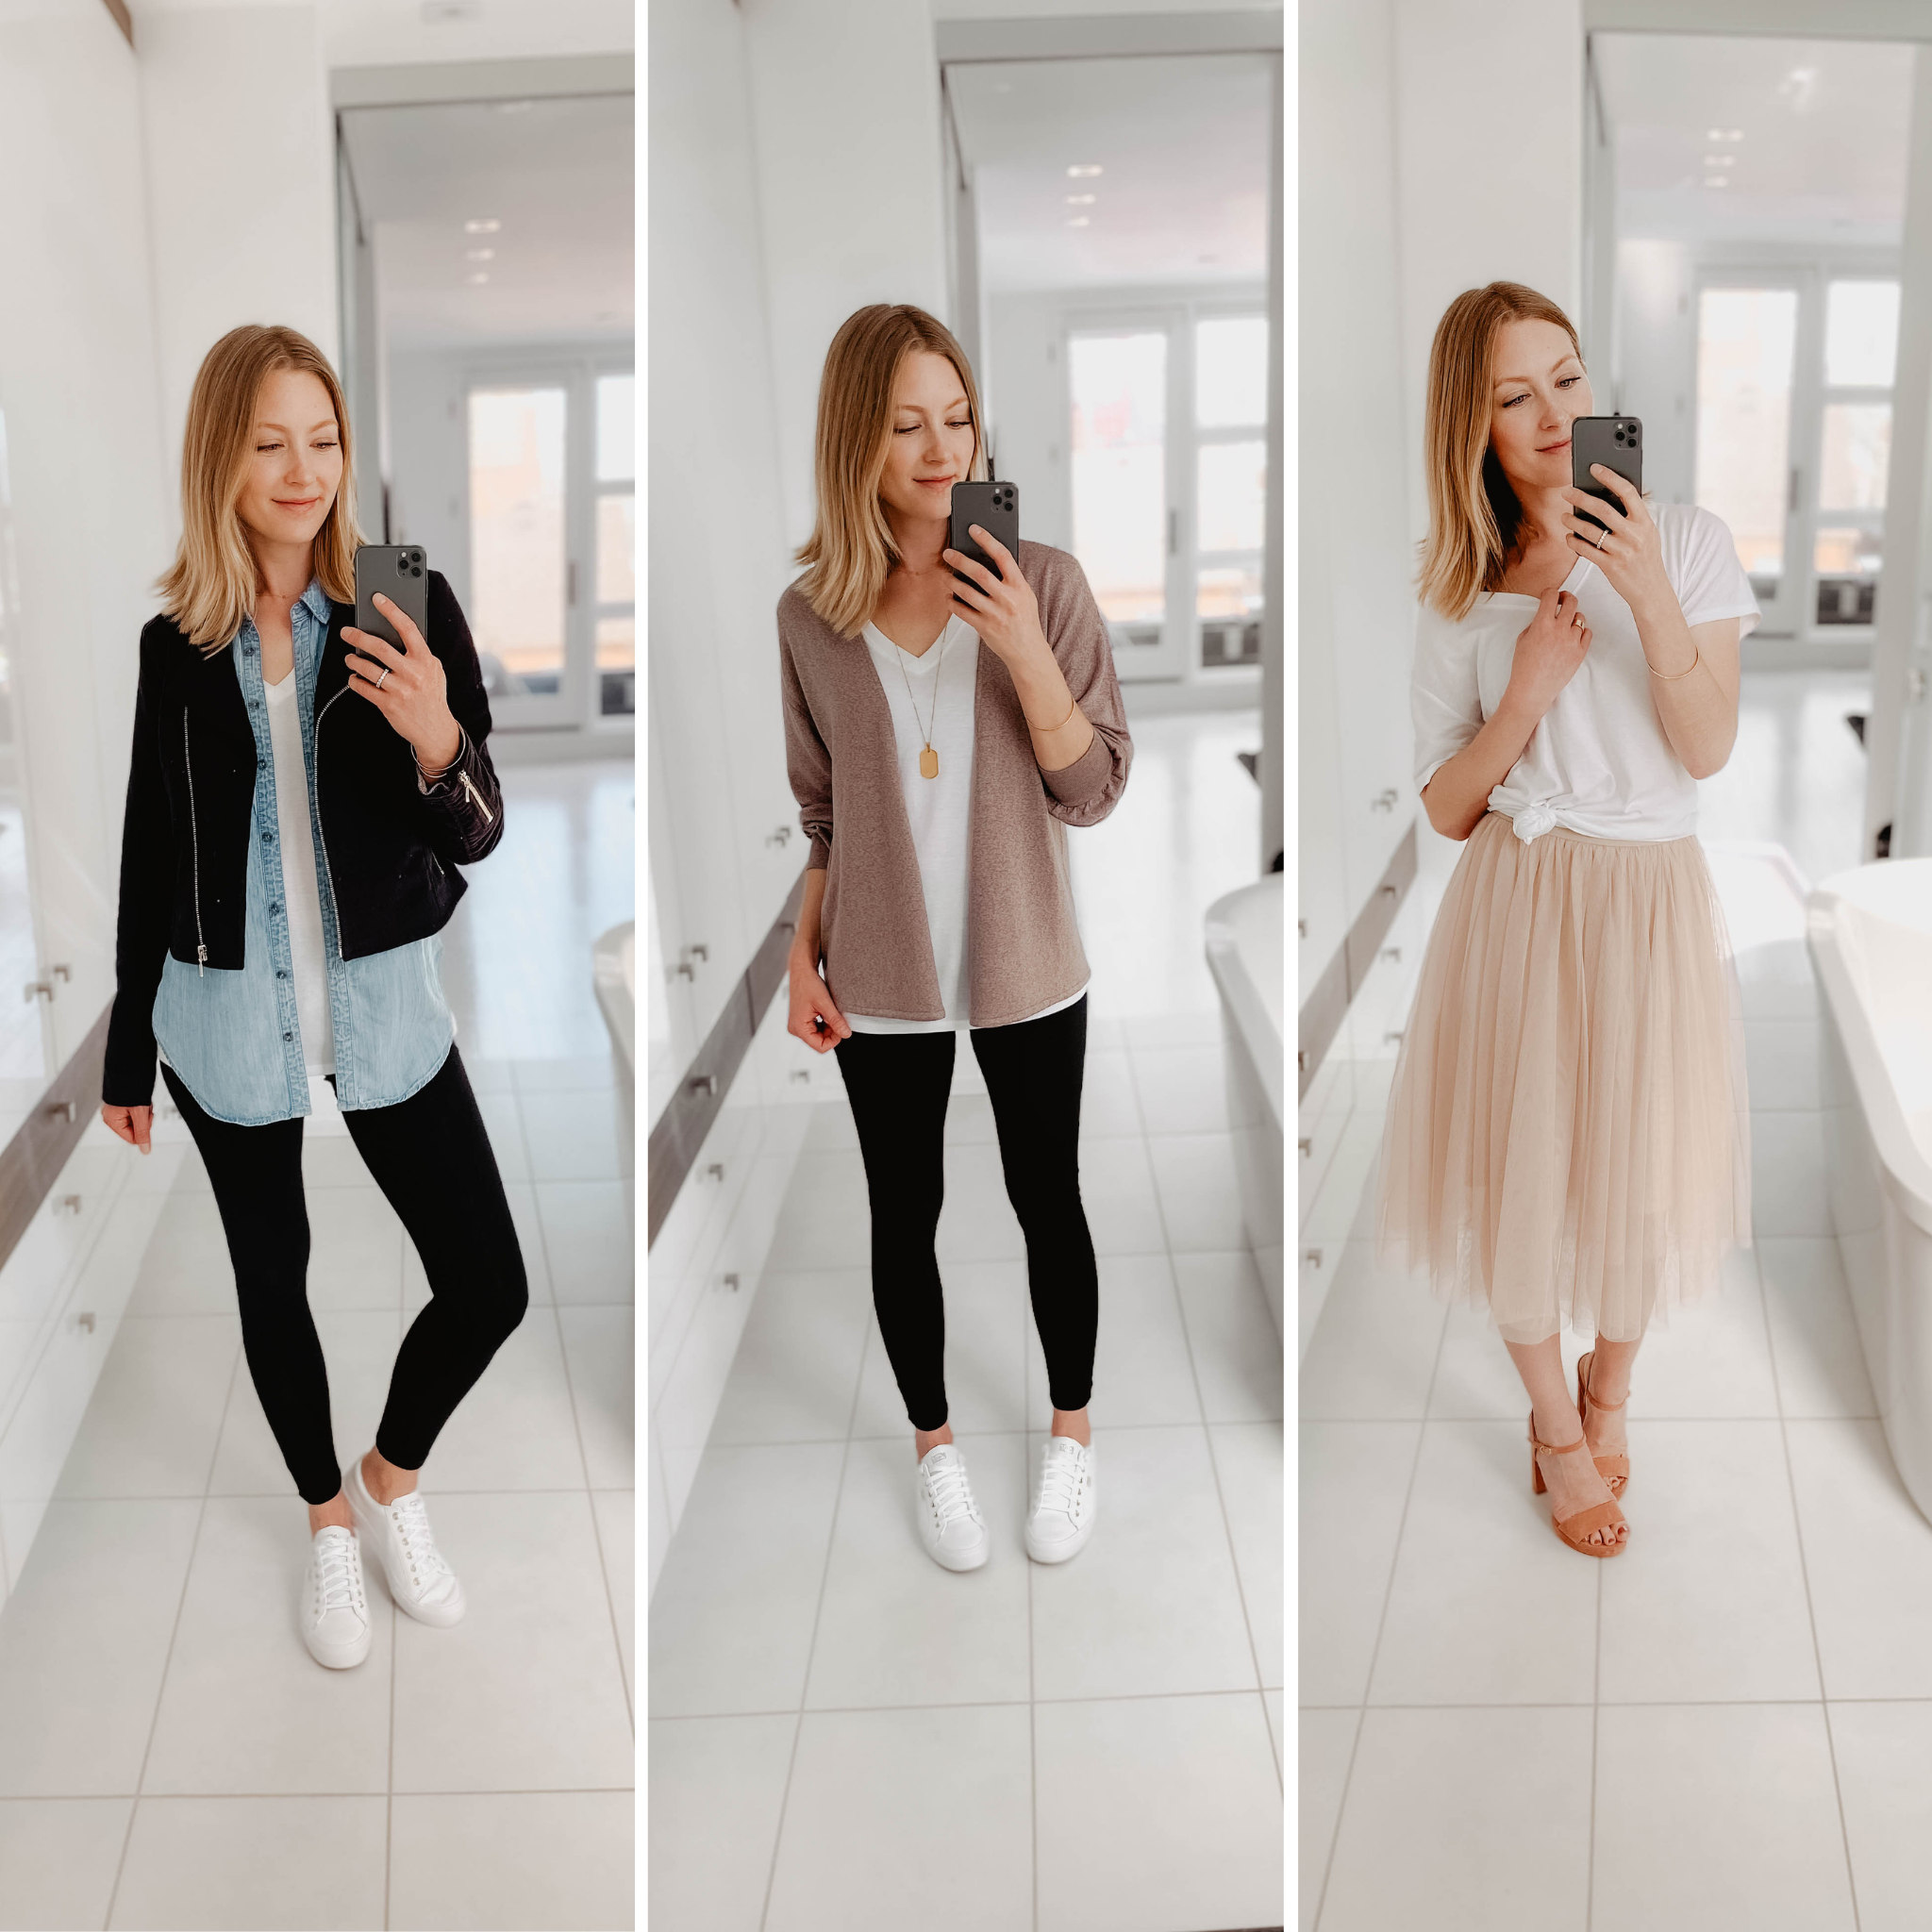 How To Look Effortlessly Chic — Plus Size Fashion Influencer & Consultant